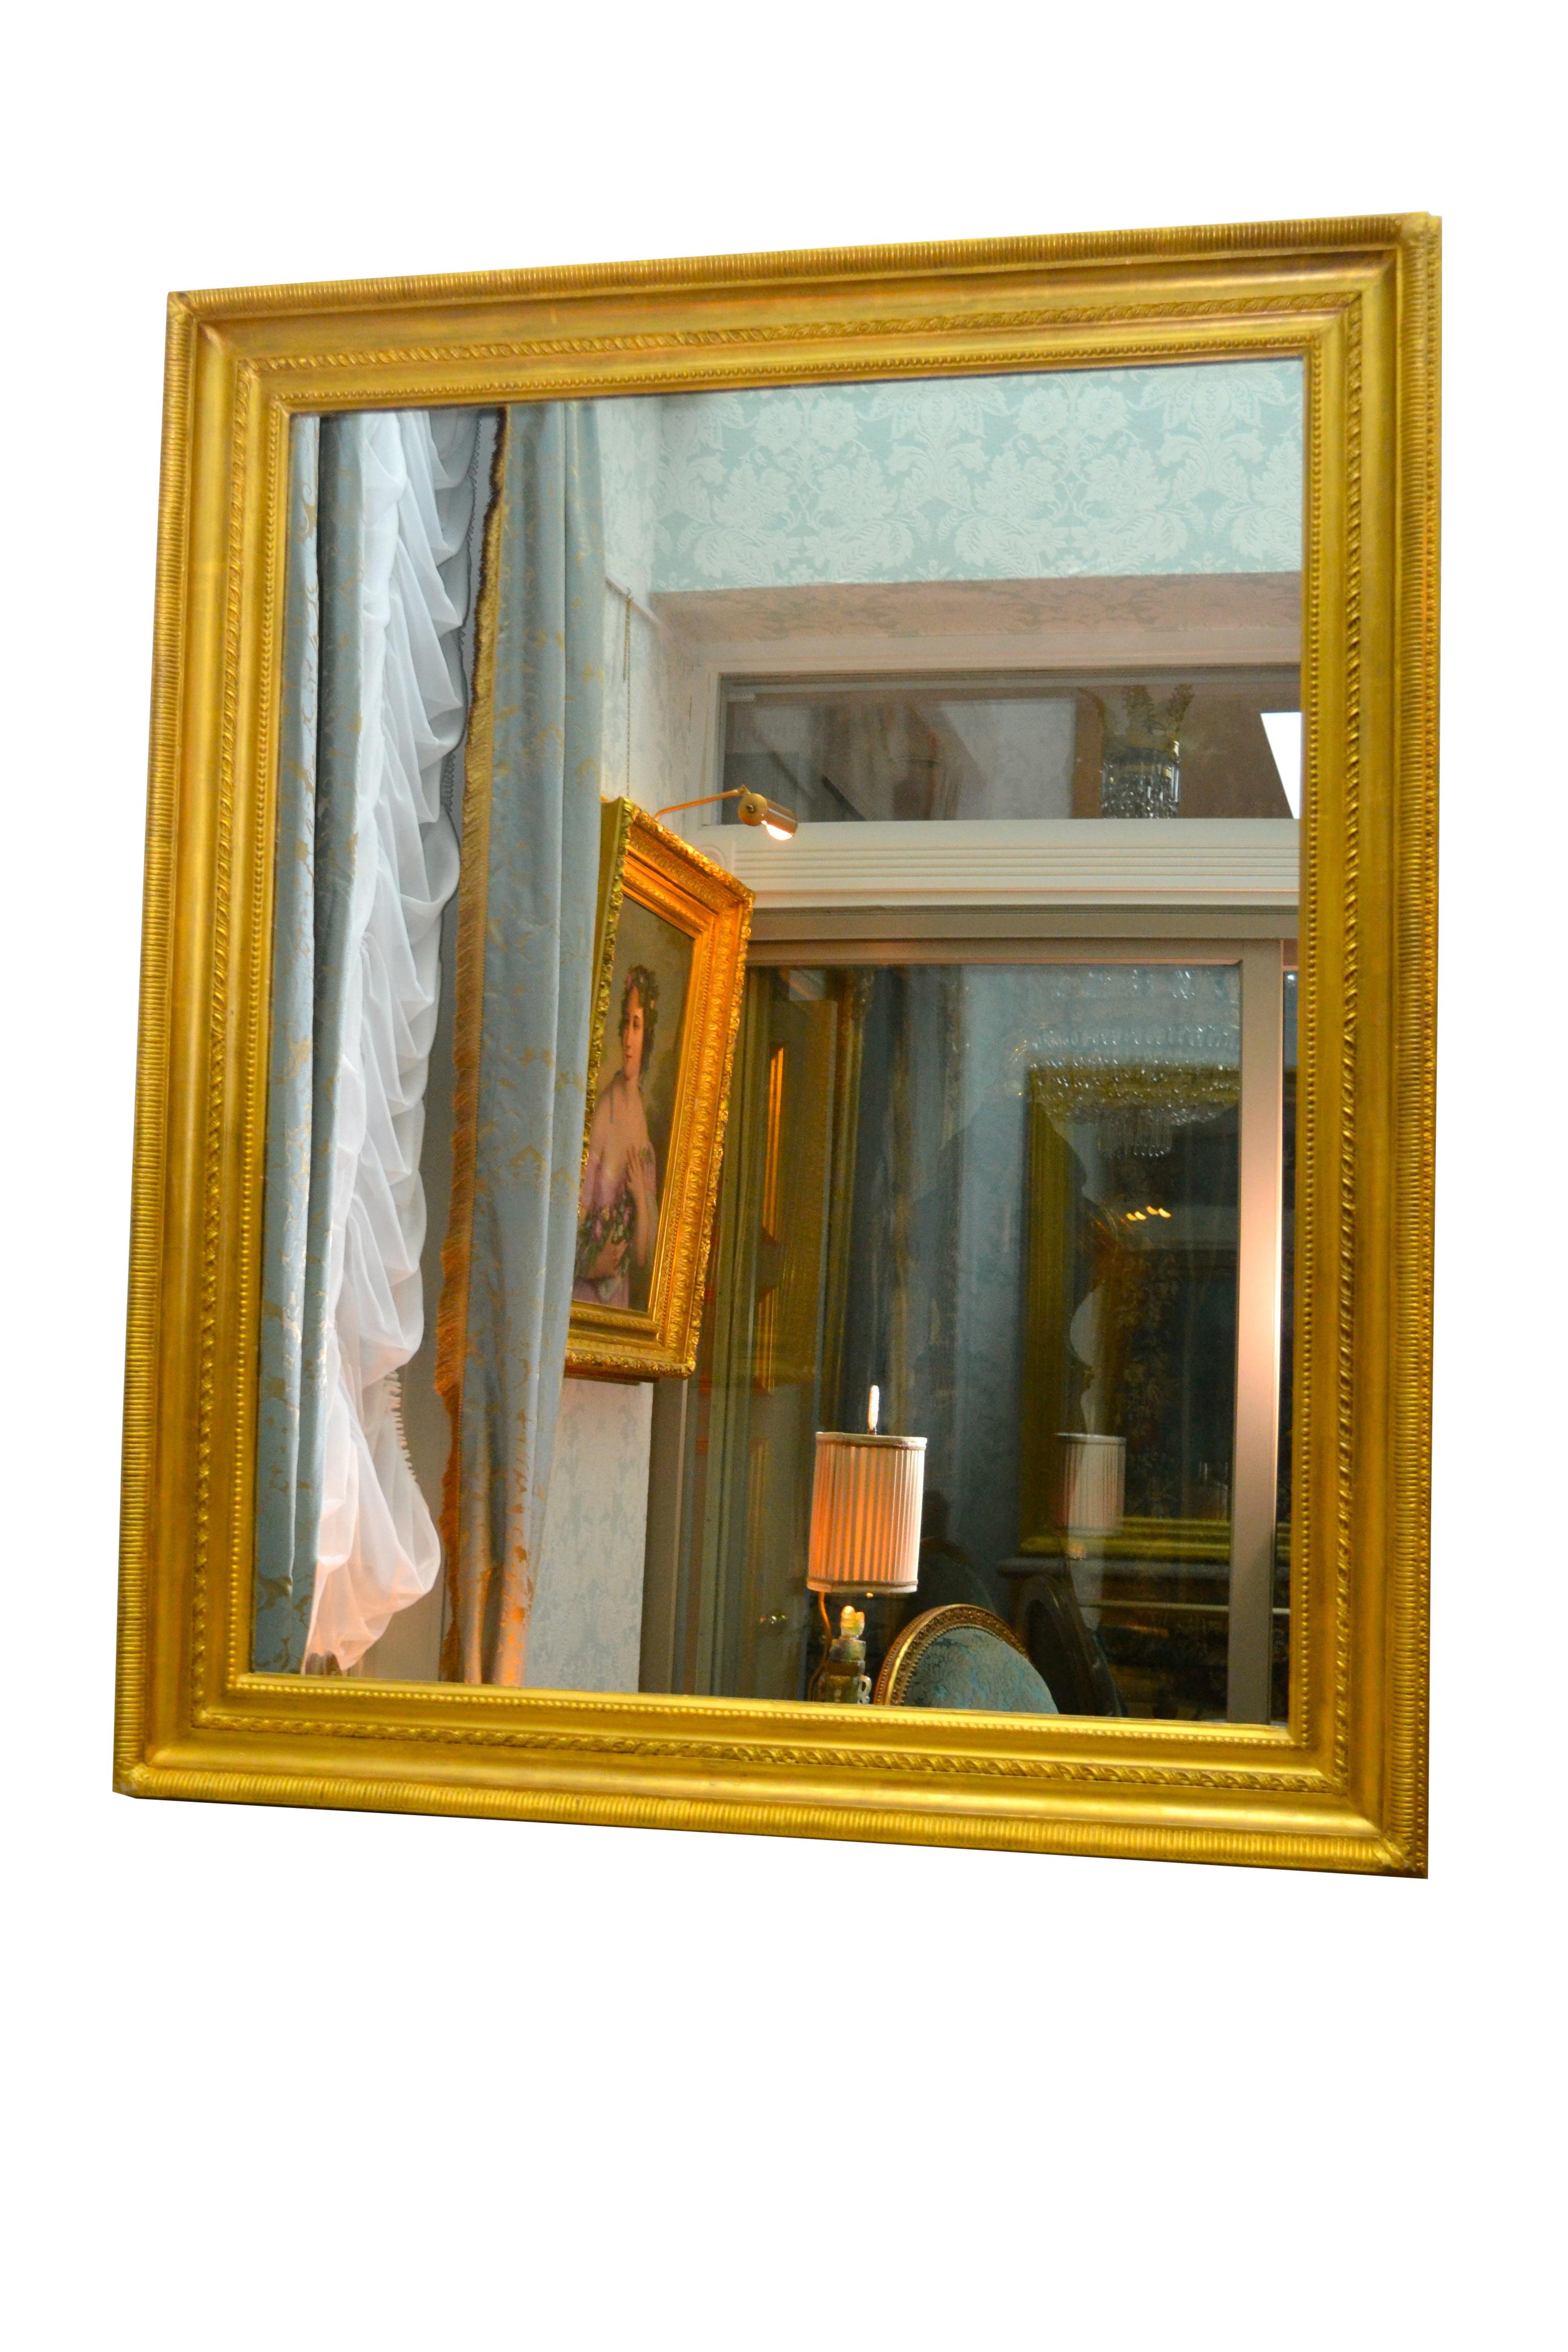 This is a simple rectangular modern mirror set in a robust 19th century giltwood frame perfect for over a mantel (fireplace) or simply hanging on a wall.